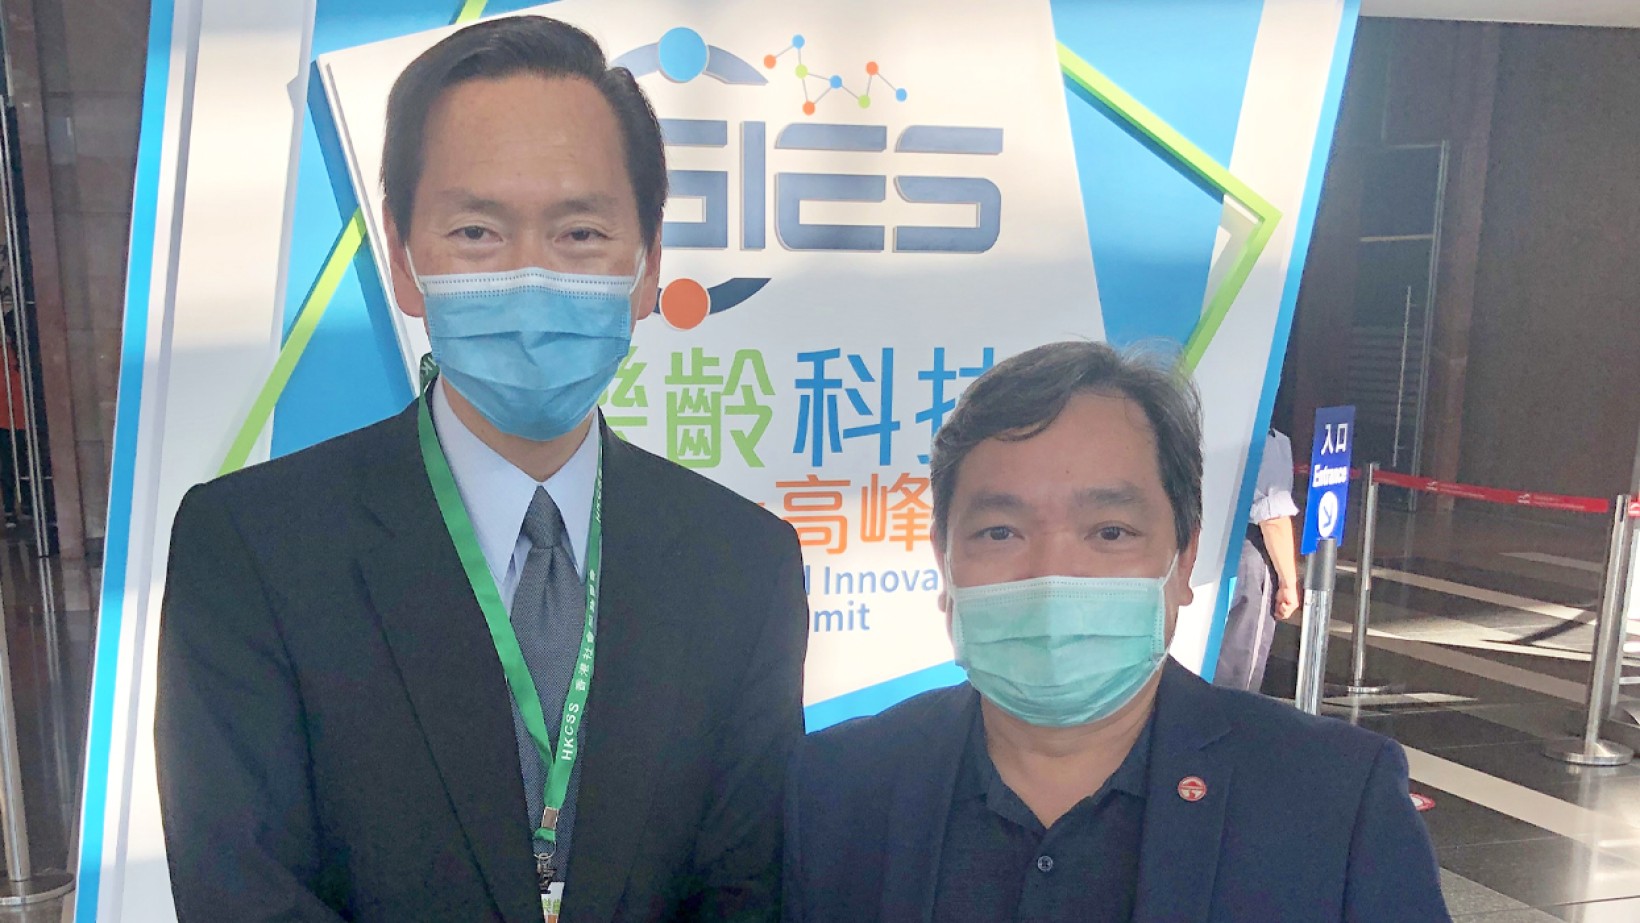 Lingnan participates in the Gerontech and Innovation Expo cum Summit (GIES) 2020